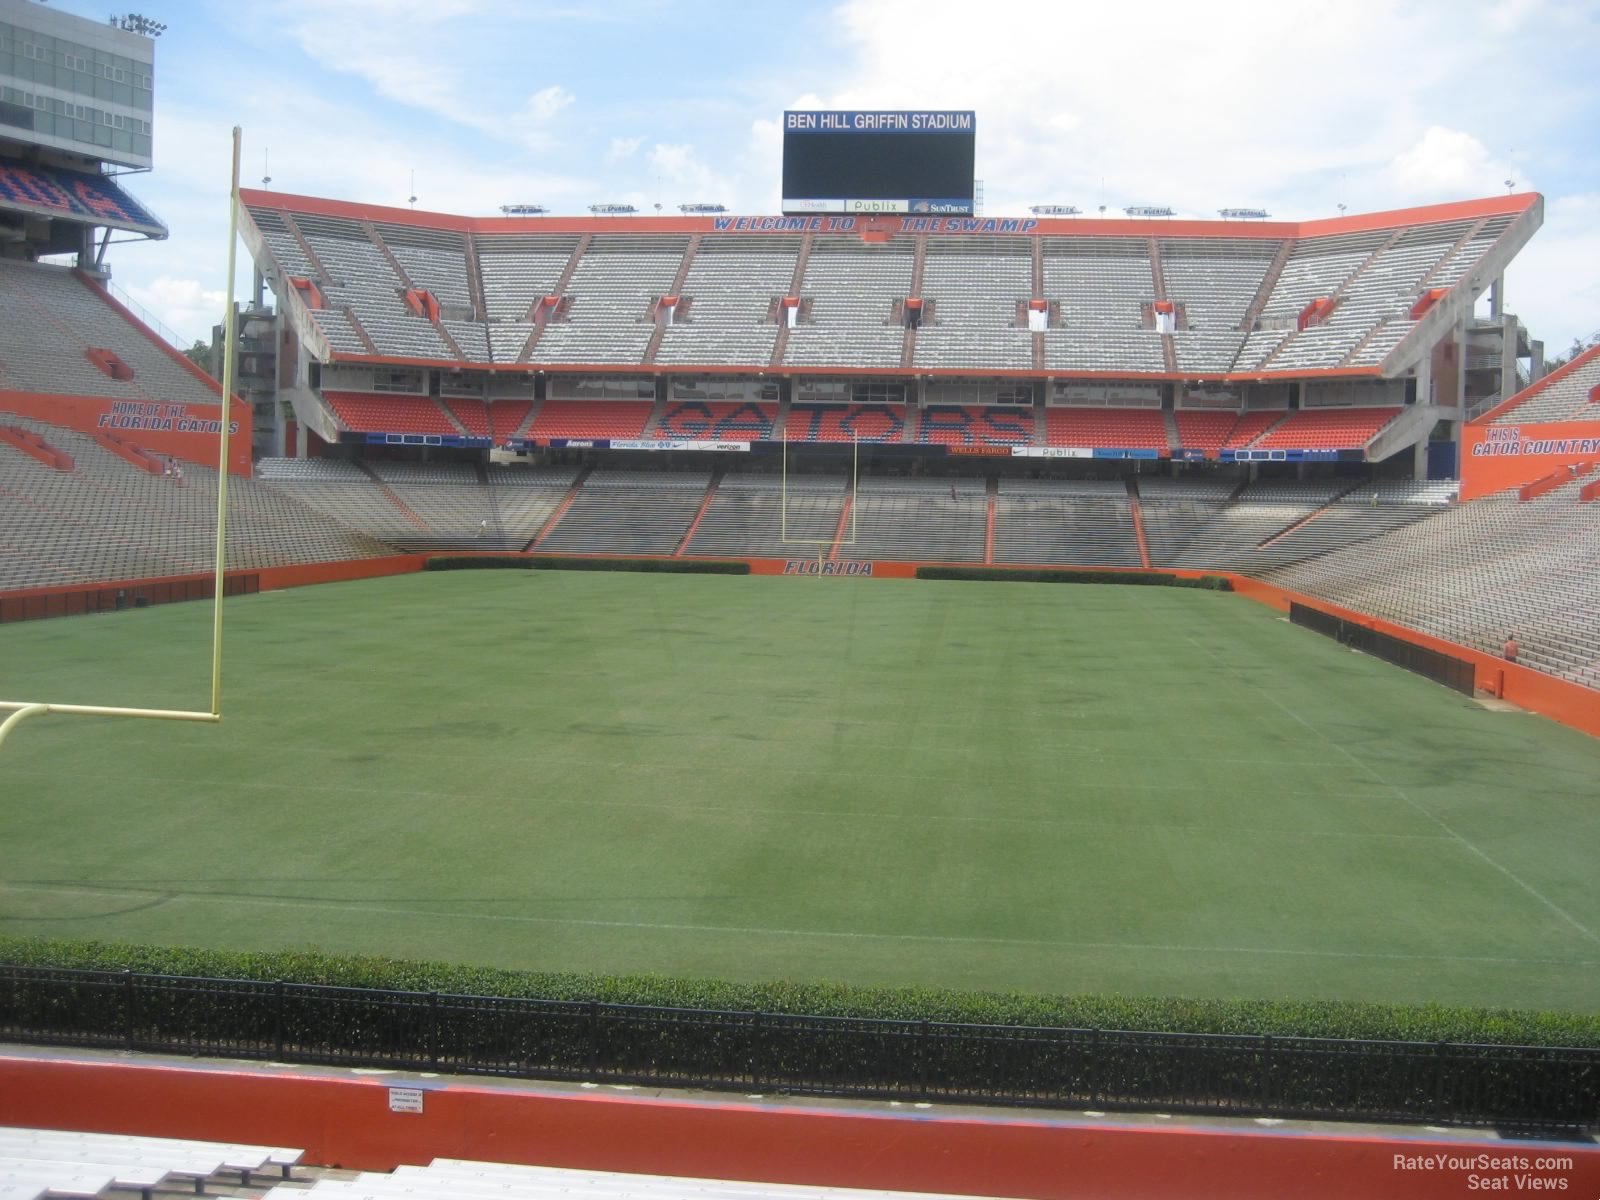 section d, row 23 seat view  - ben hill griffin stadium